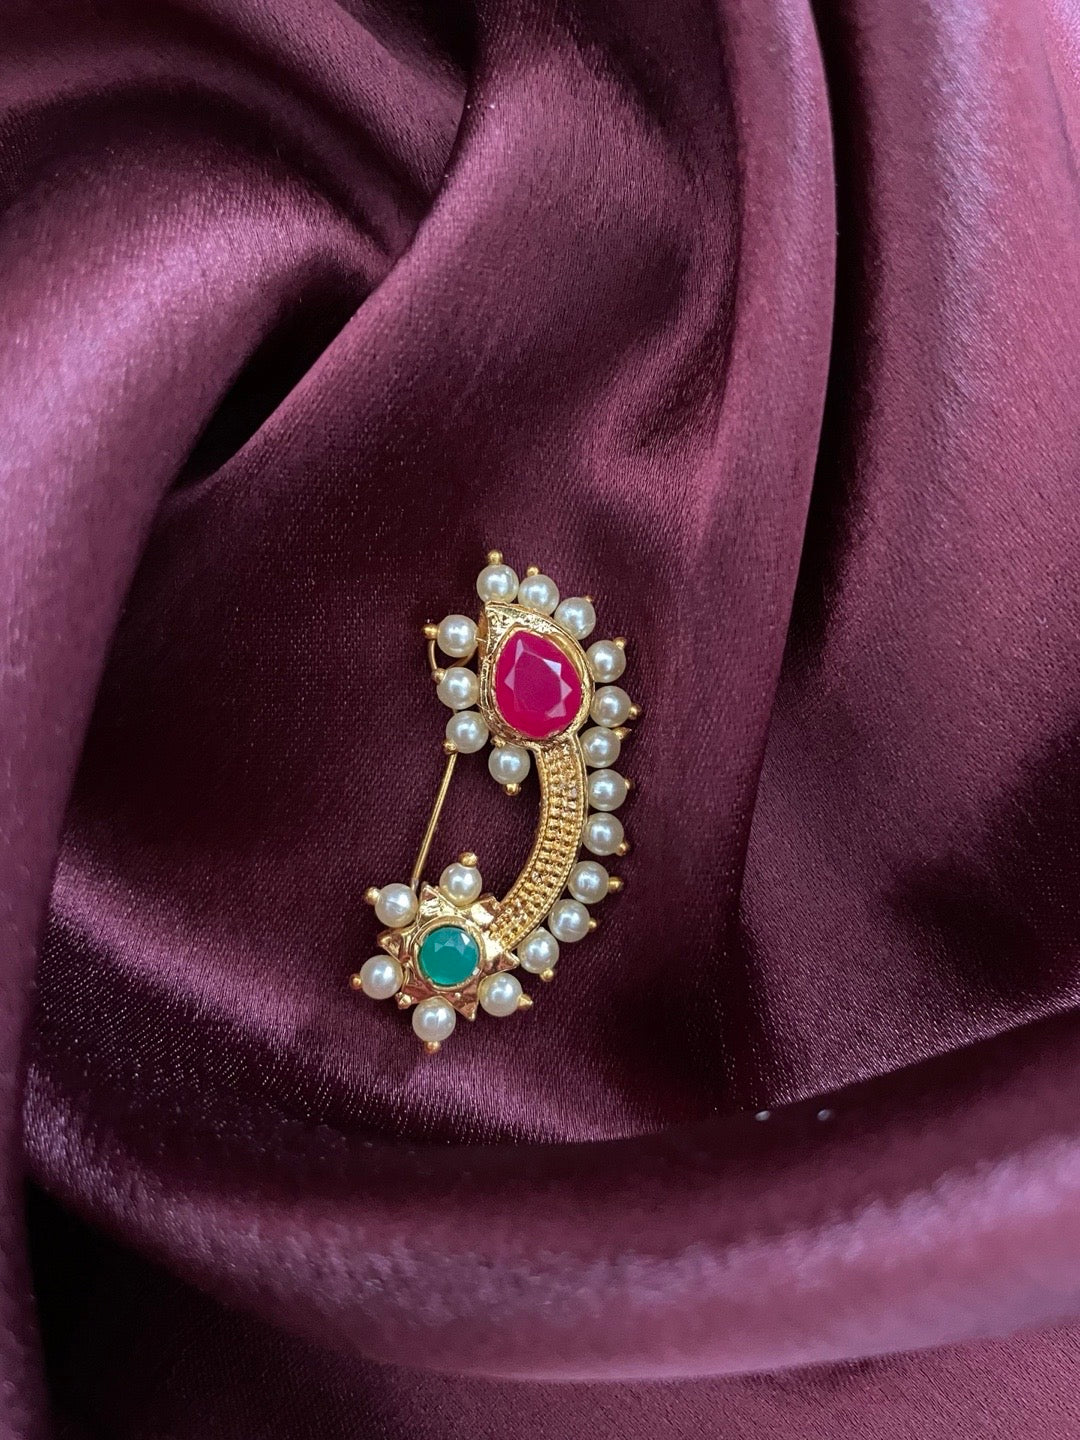 Gold Plated Maharashtrian Nath Nose Pin Red & Green Colour with Pearls